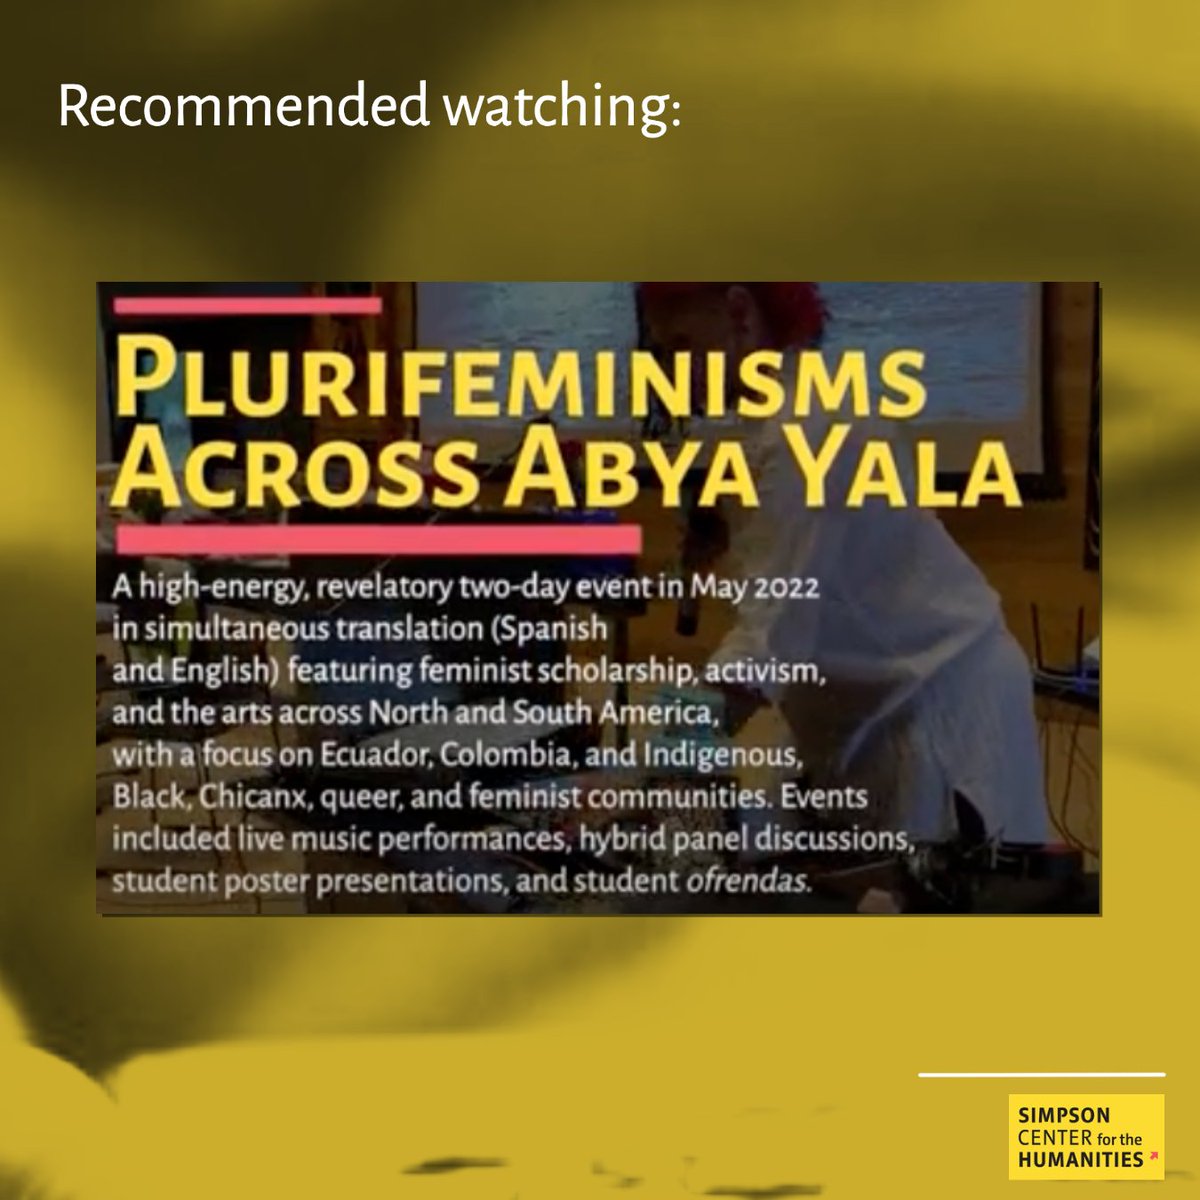 In this three-minute video, Michelle Habell-Pallán (@UWGWSS) explains keyword #Plurifeminisms through the May 2022 event, 'Plurifeminisms Across Abya Yala.' Please share with students and colleagues interested in learning more about Plurifeminisms. bit.ly/3UZZ6og